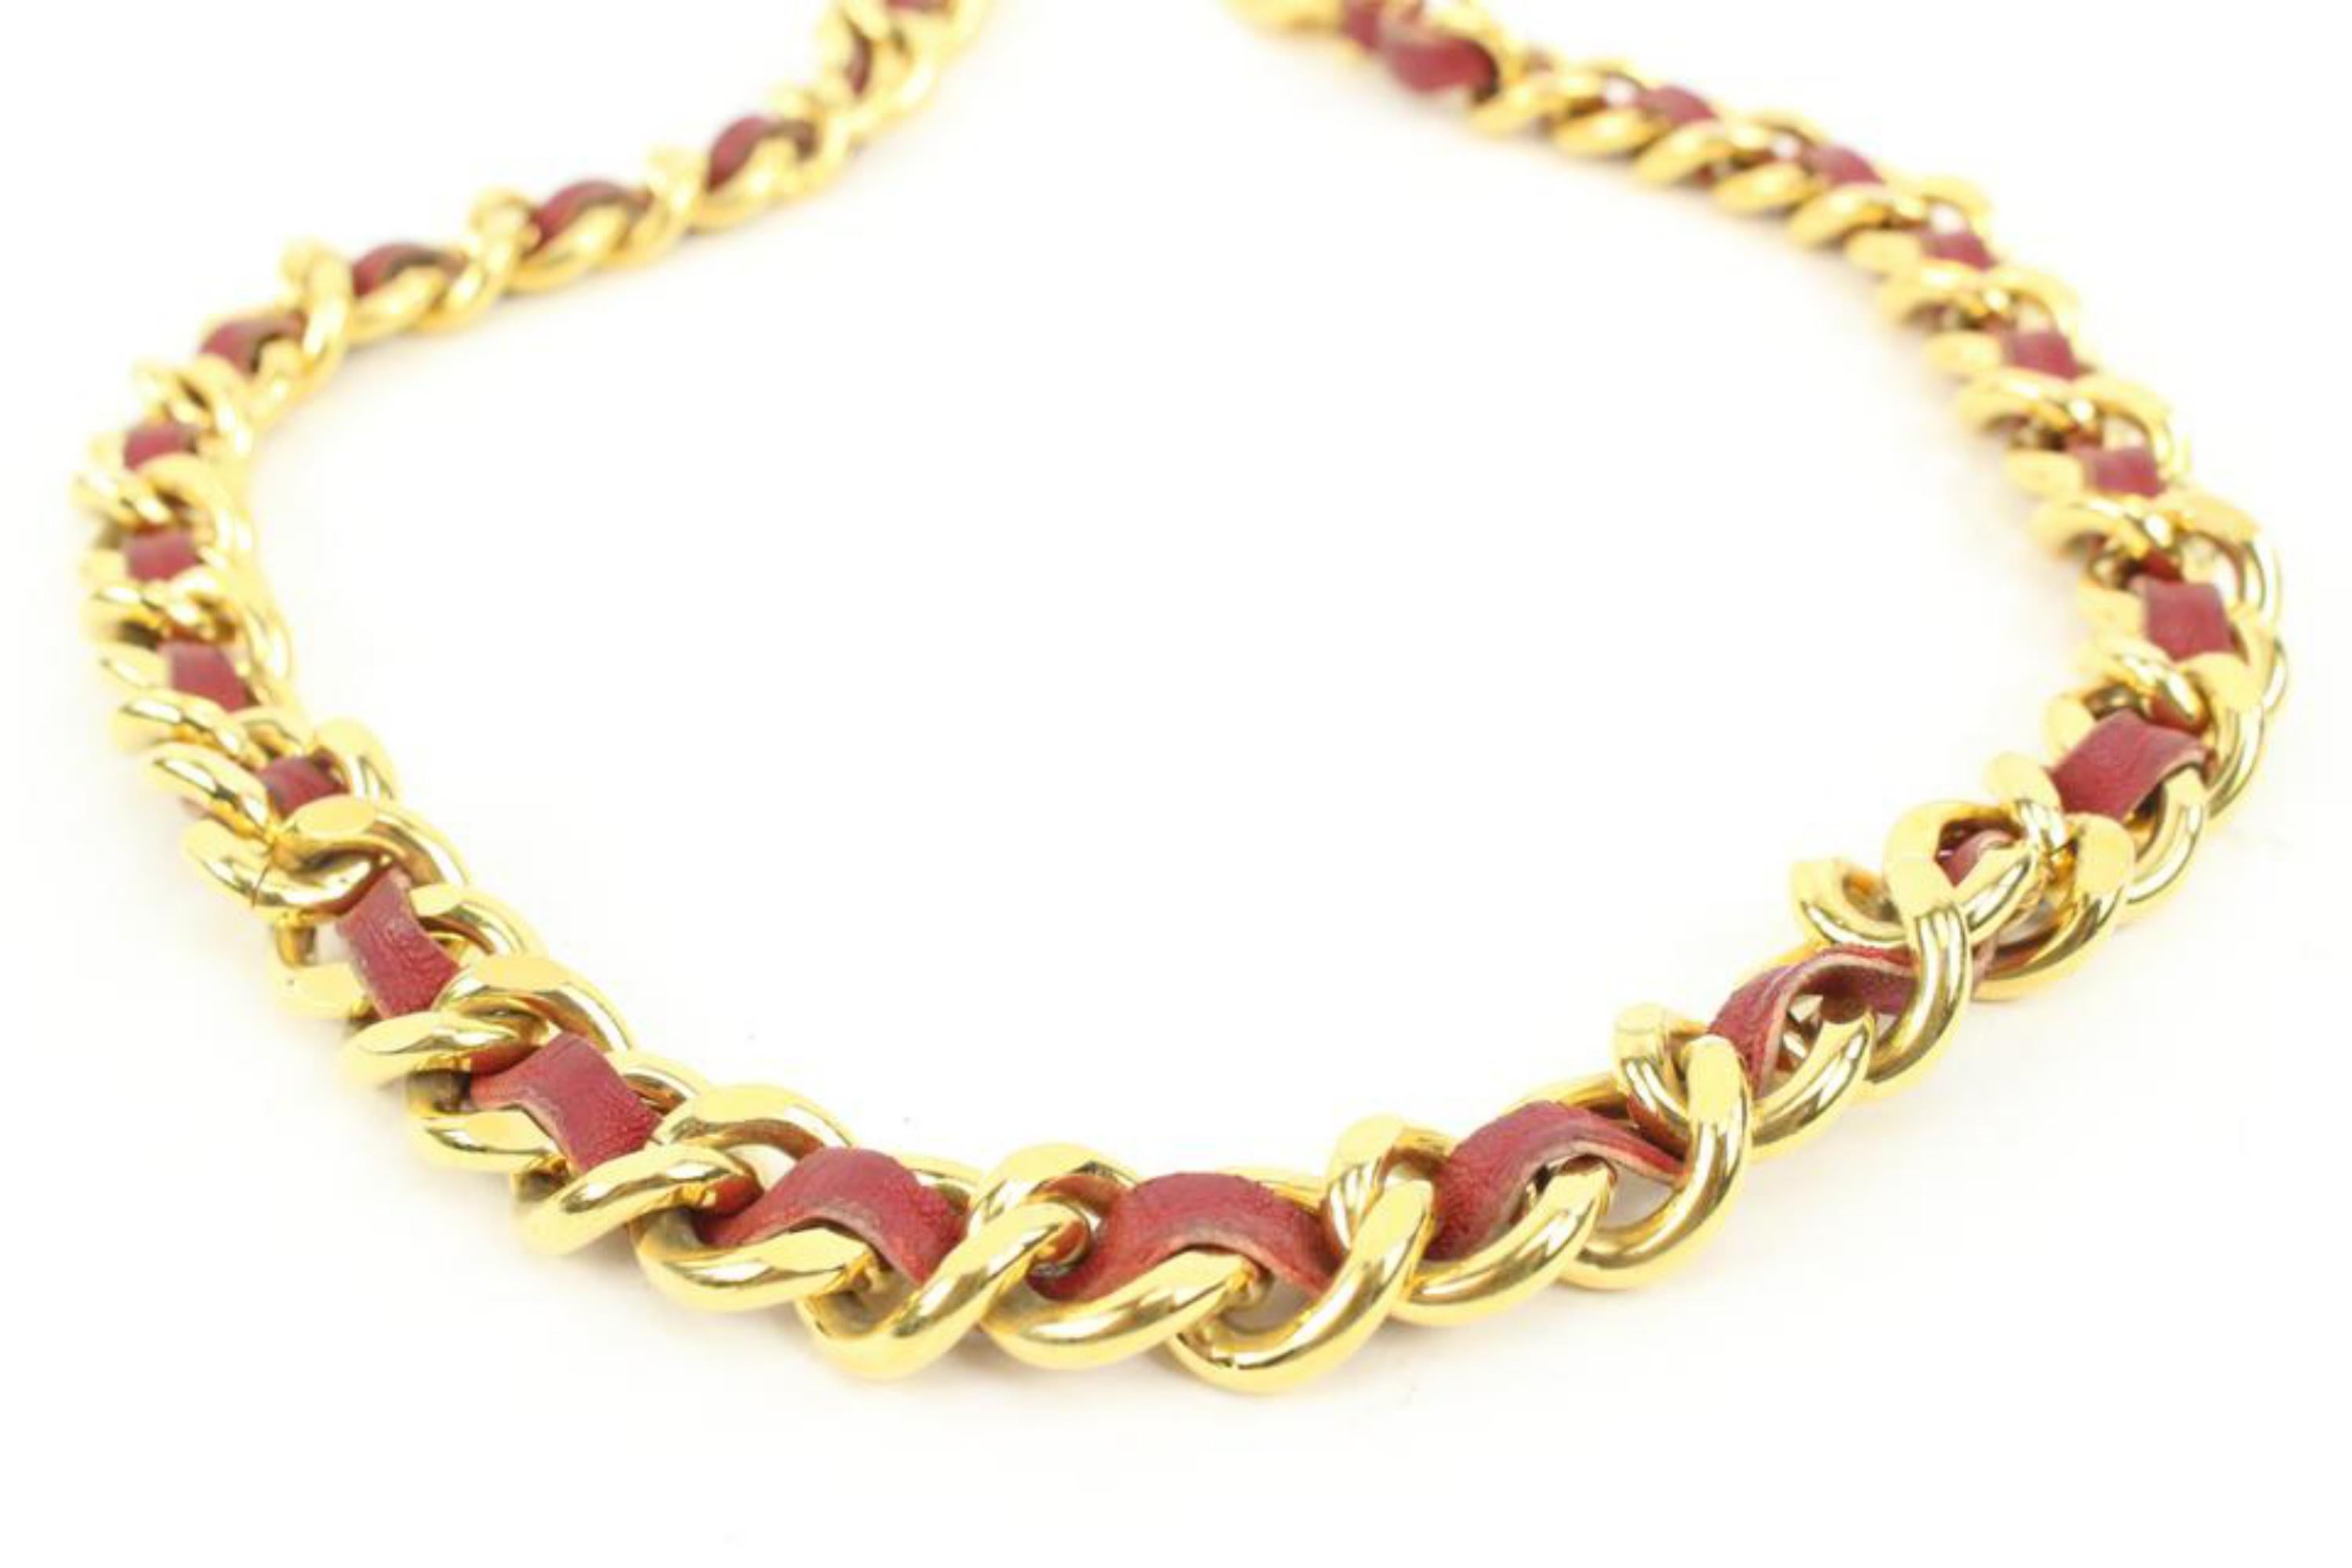 Chanel Red Leather x Gold Chain Interlaced Belt or Necklace Medallion s210c62 2